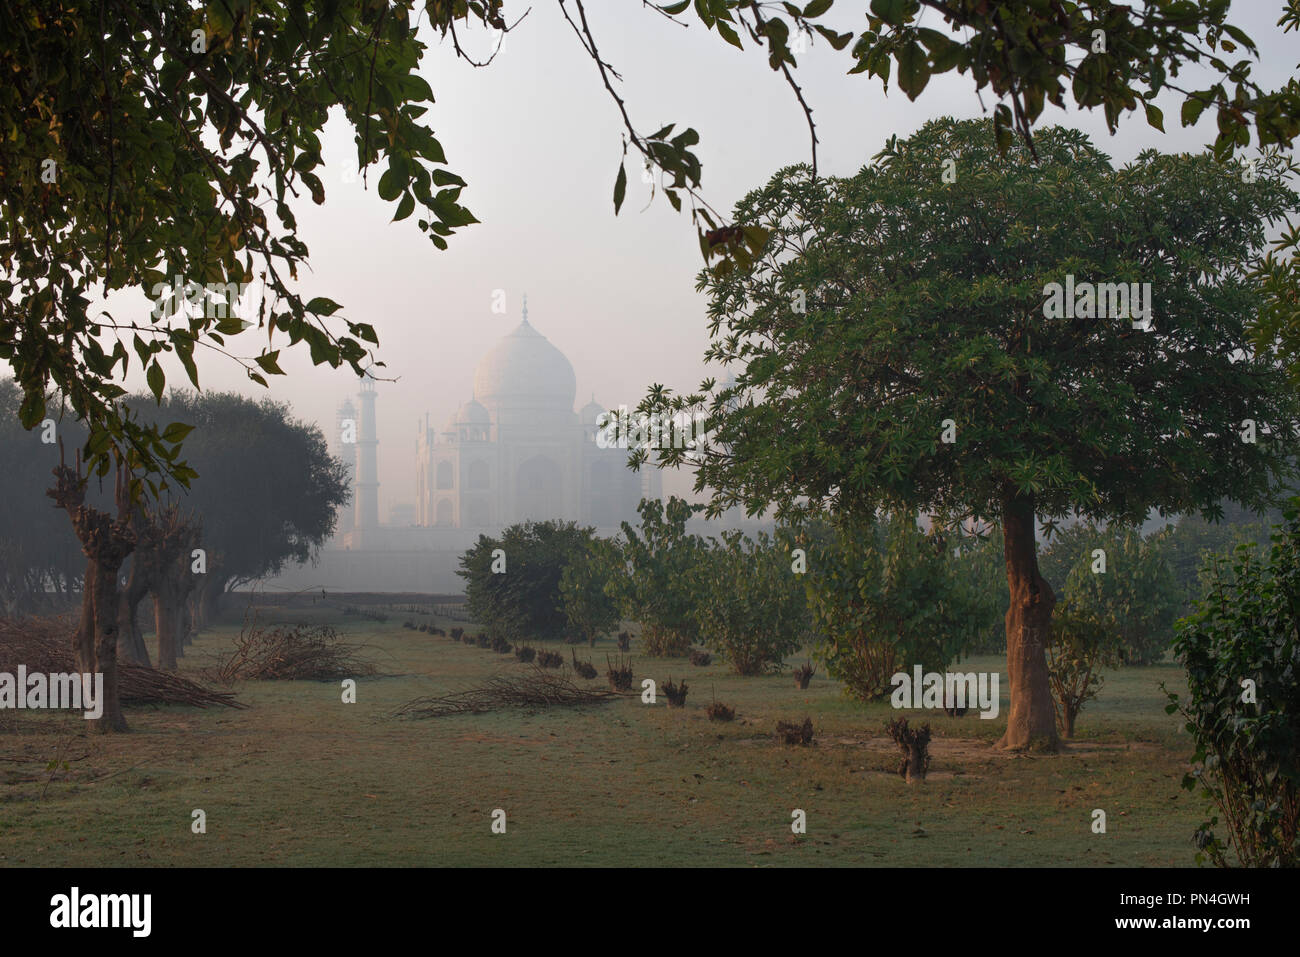 Taj Mahal the wonder of the world and the pride of India in winter early morning light and haze as seen from Mehtab Bagh with trees in the foreground Stock Photo